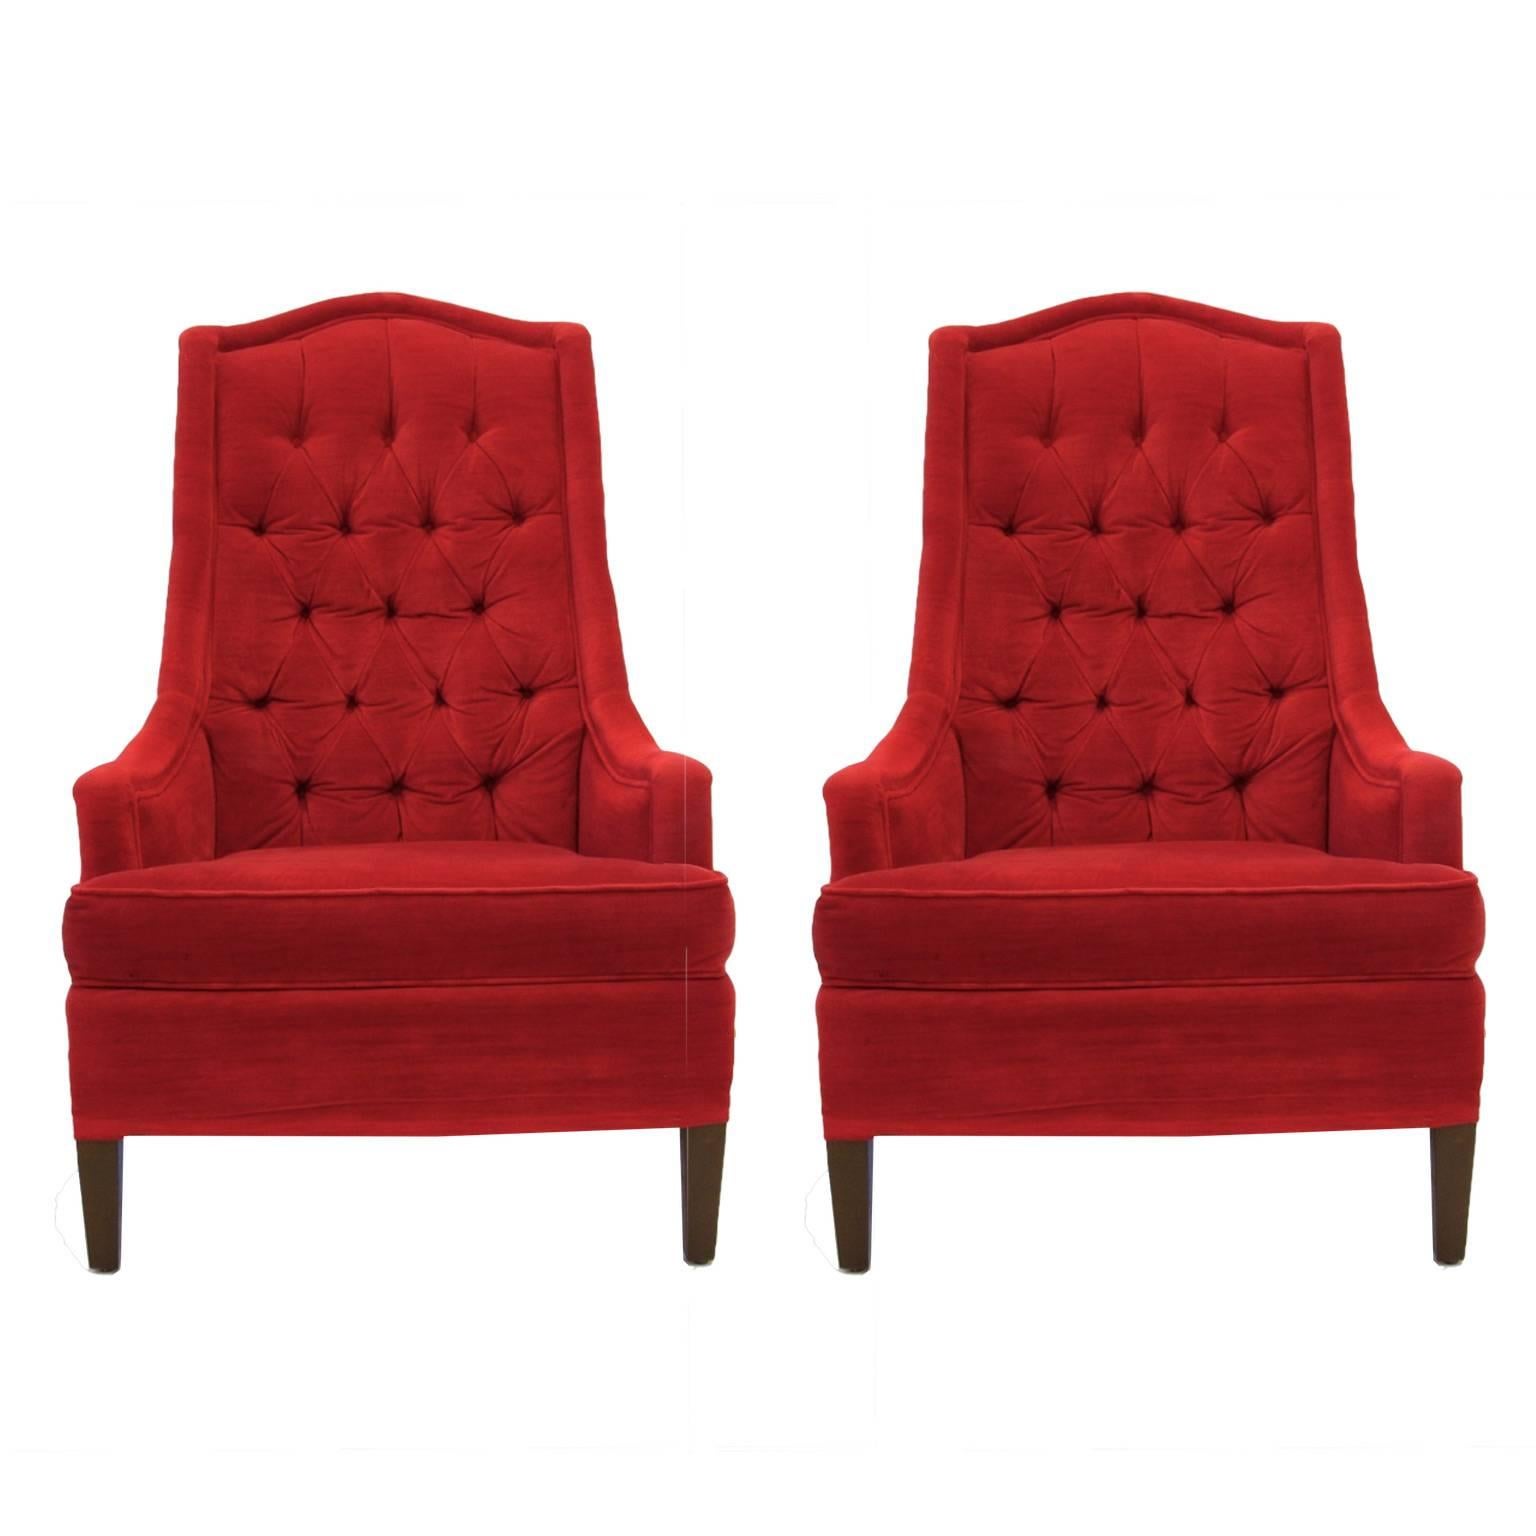 Excellent Pair of Tufted Red Velvet Classic Regency Arm or Club Chairs